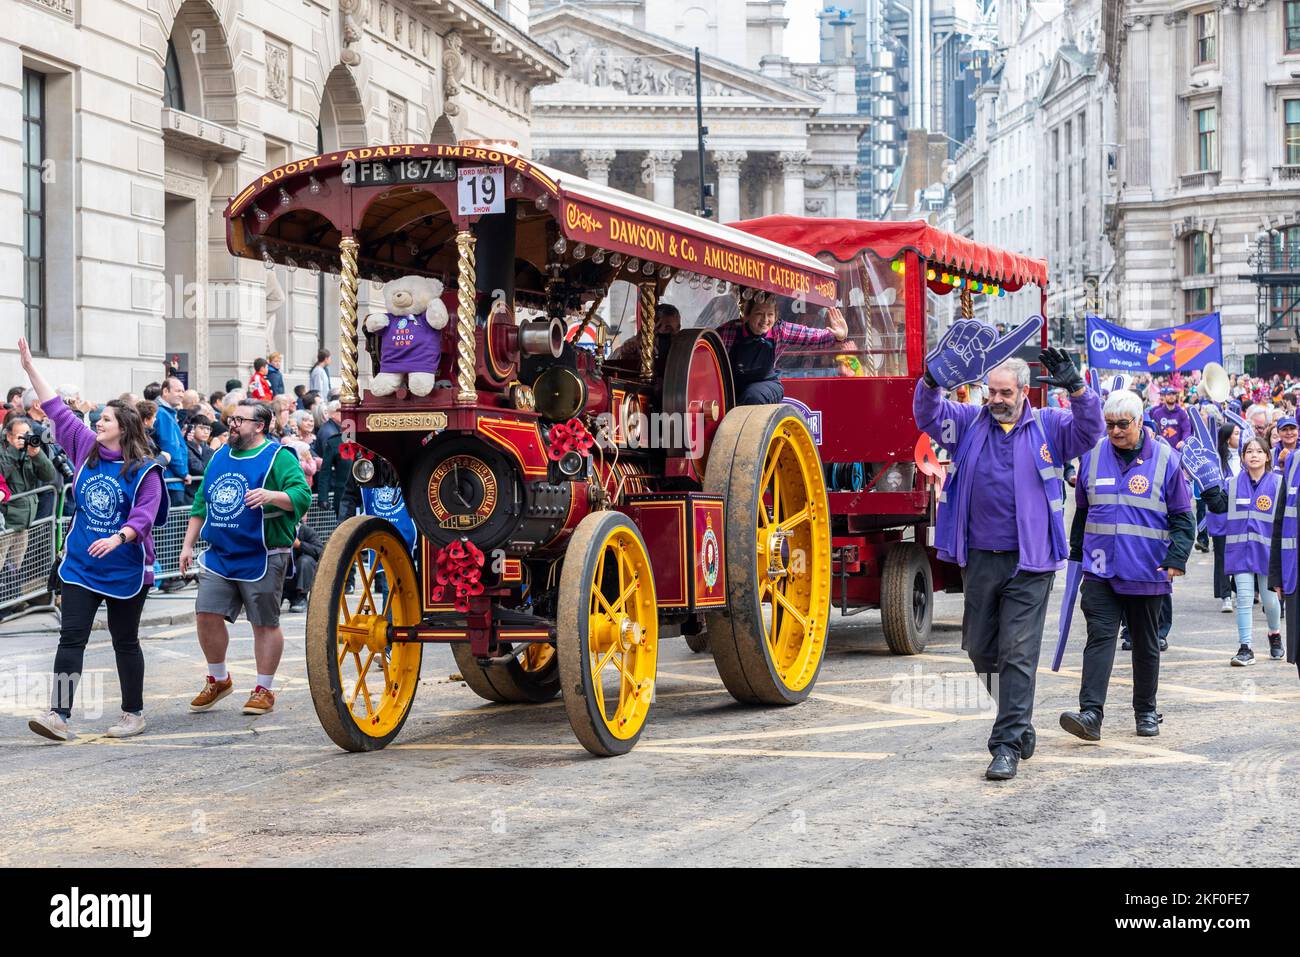 Rotary in London at the Lord Mayor's Show parade in the City of London, UK. Traction engine pulling a trailer. Showman's road locomotive 'Obsession' Stock Photo